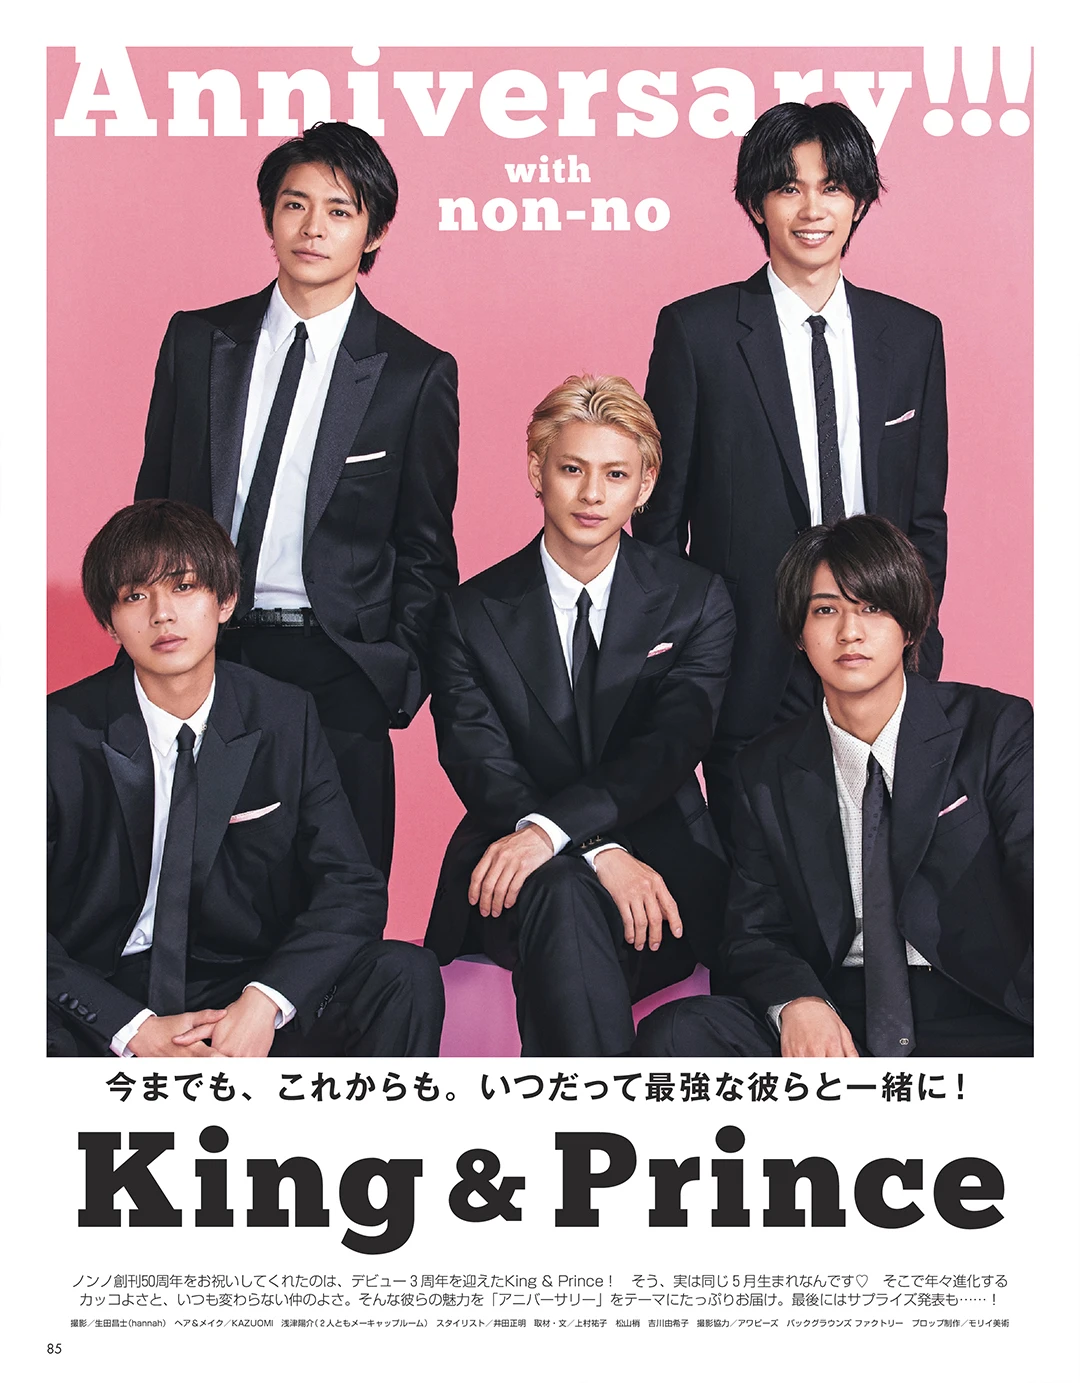 King &amp; Prince Anniversary with non-no